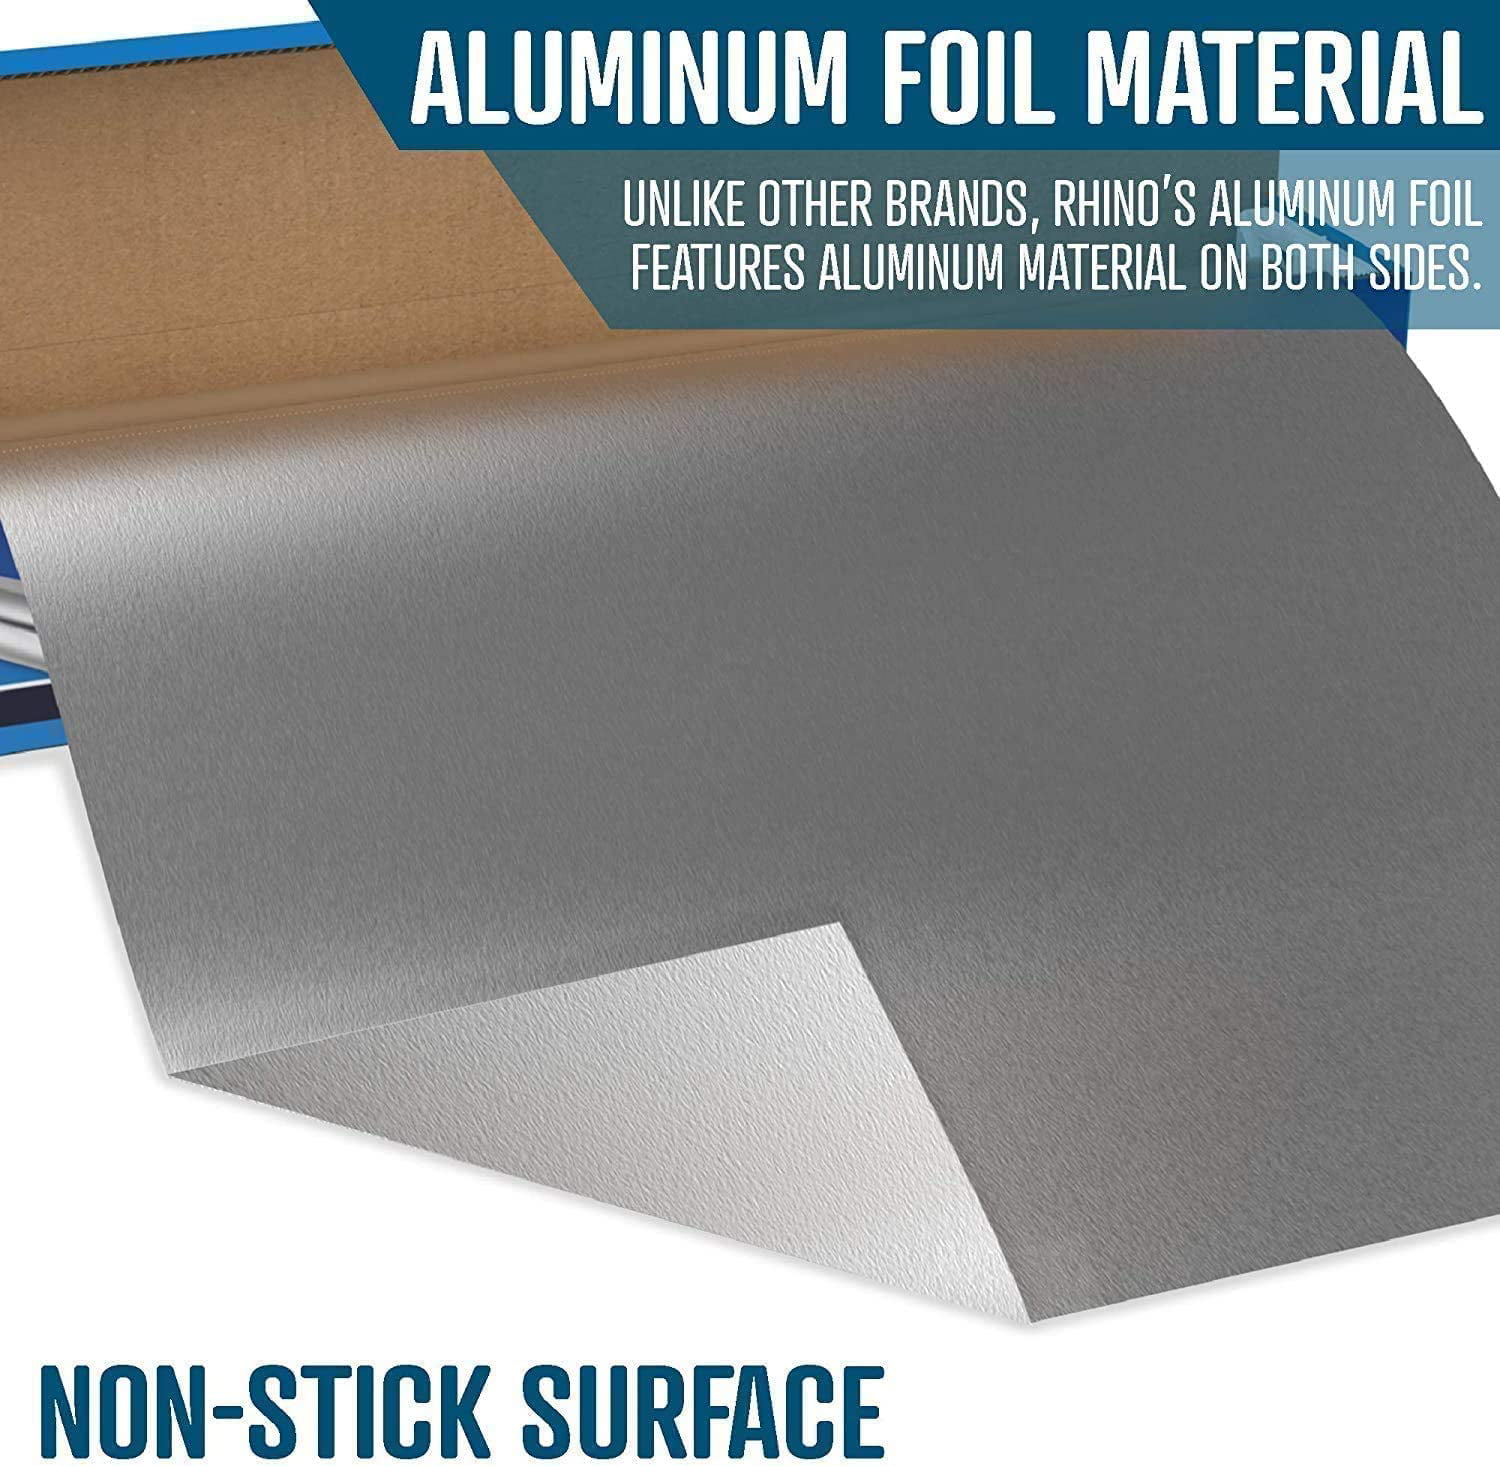 Strong 85um Thick Aluminum Foil for Long Term Storage - Color Coded Black  125mmx78mm, 100/Sheets